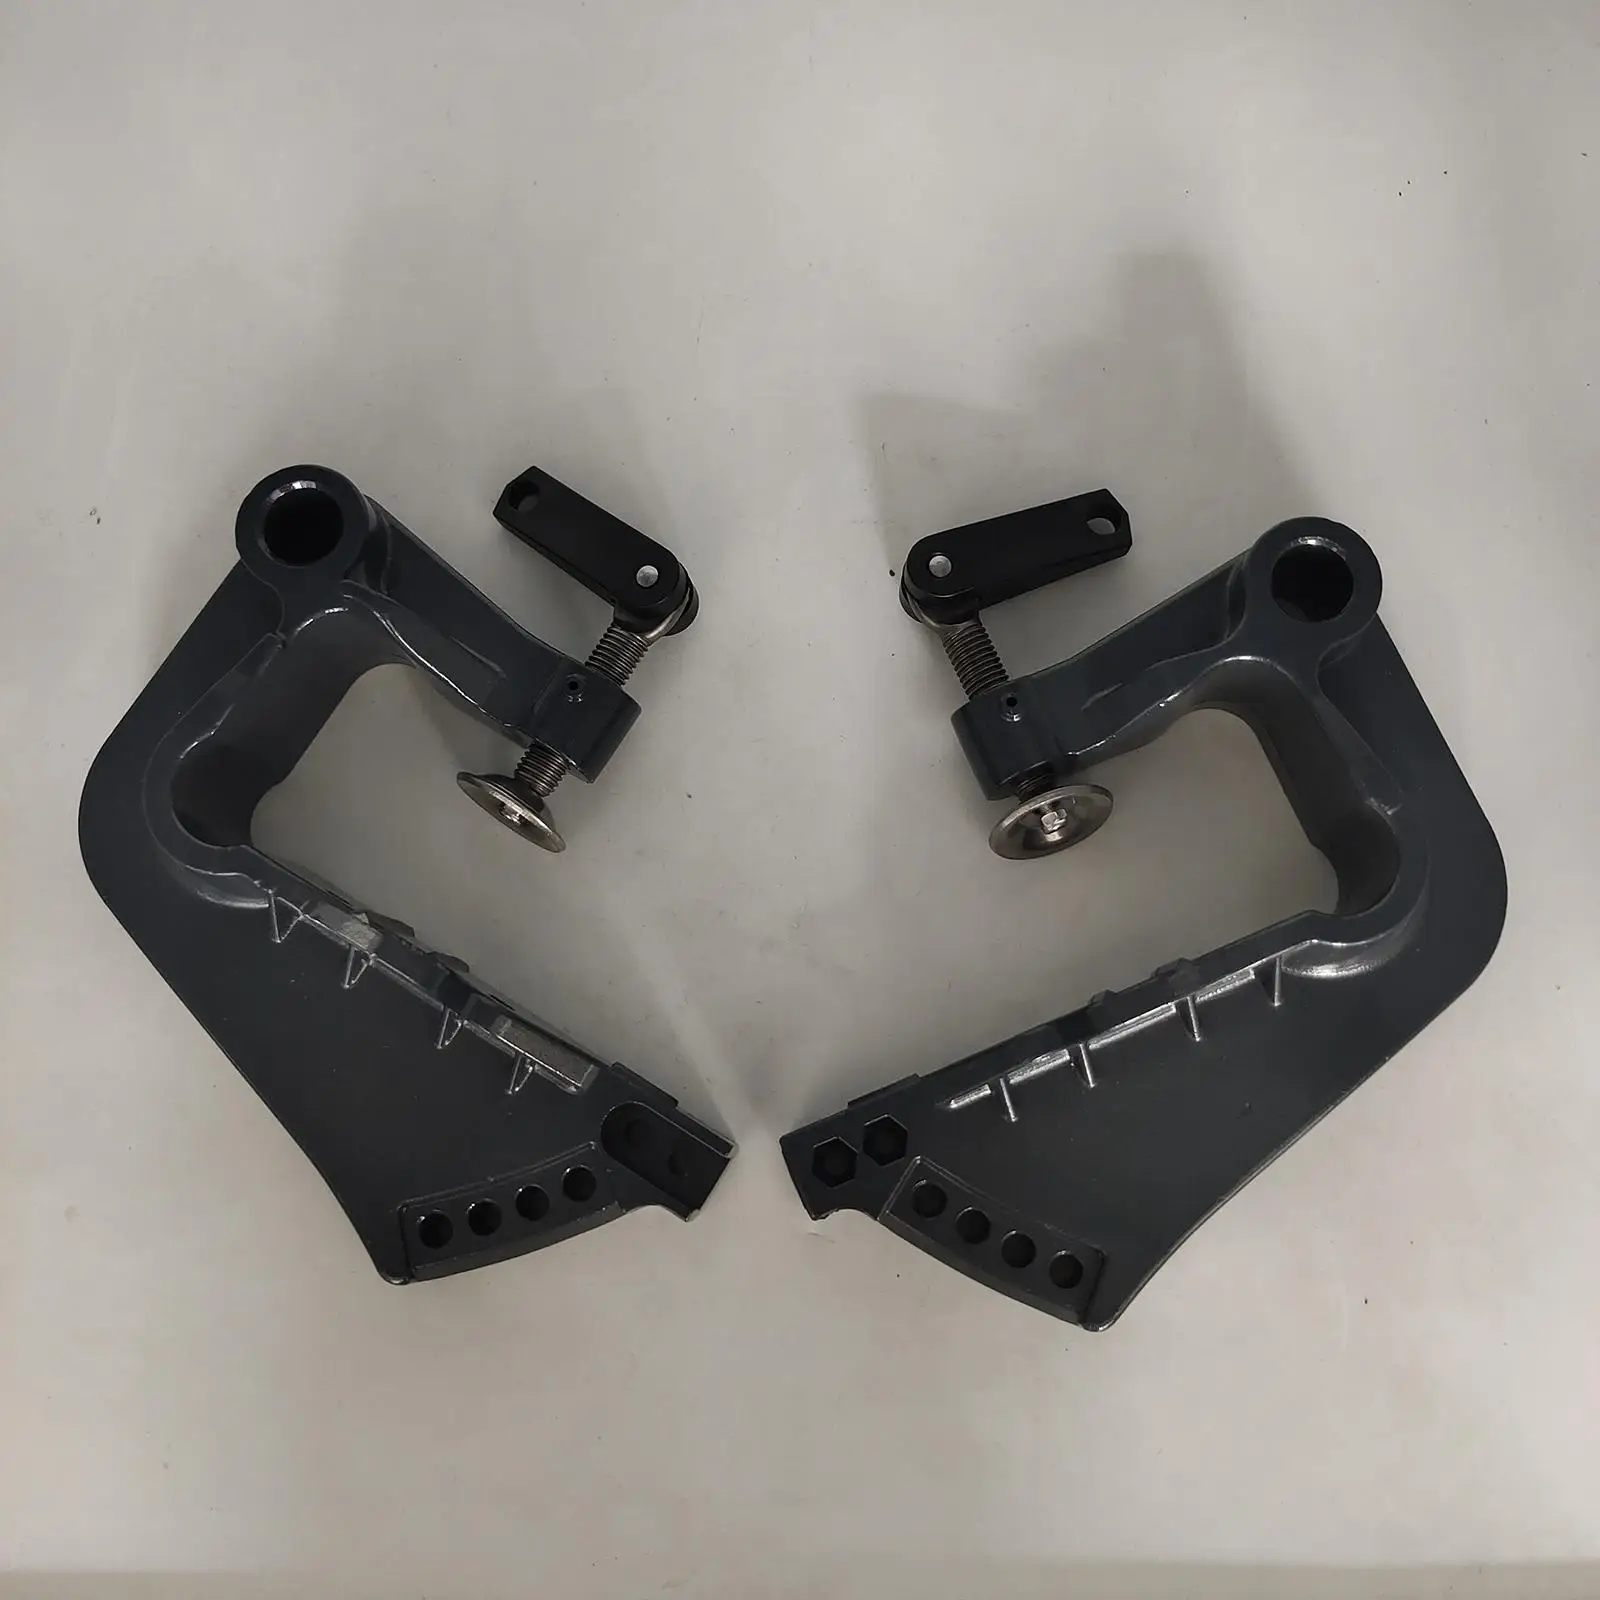 Outboard Motor Bracket Engines Repair Part Accessories Replacement of Yamaha 9.9 HP 15 HP 2 Stroke Sturdy